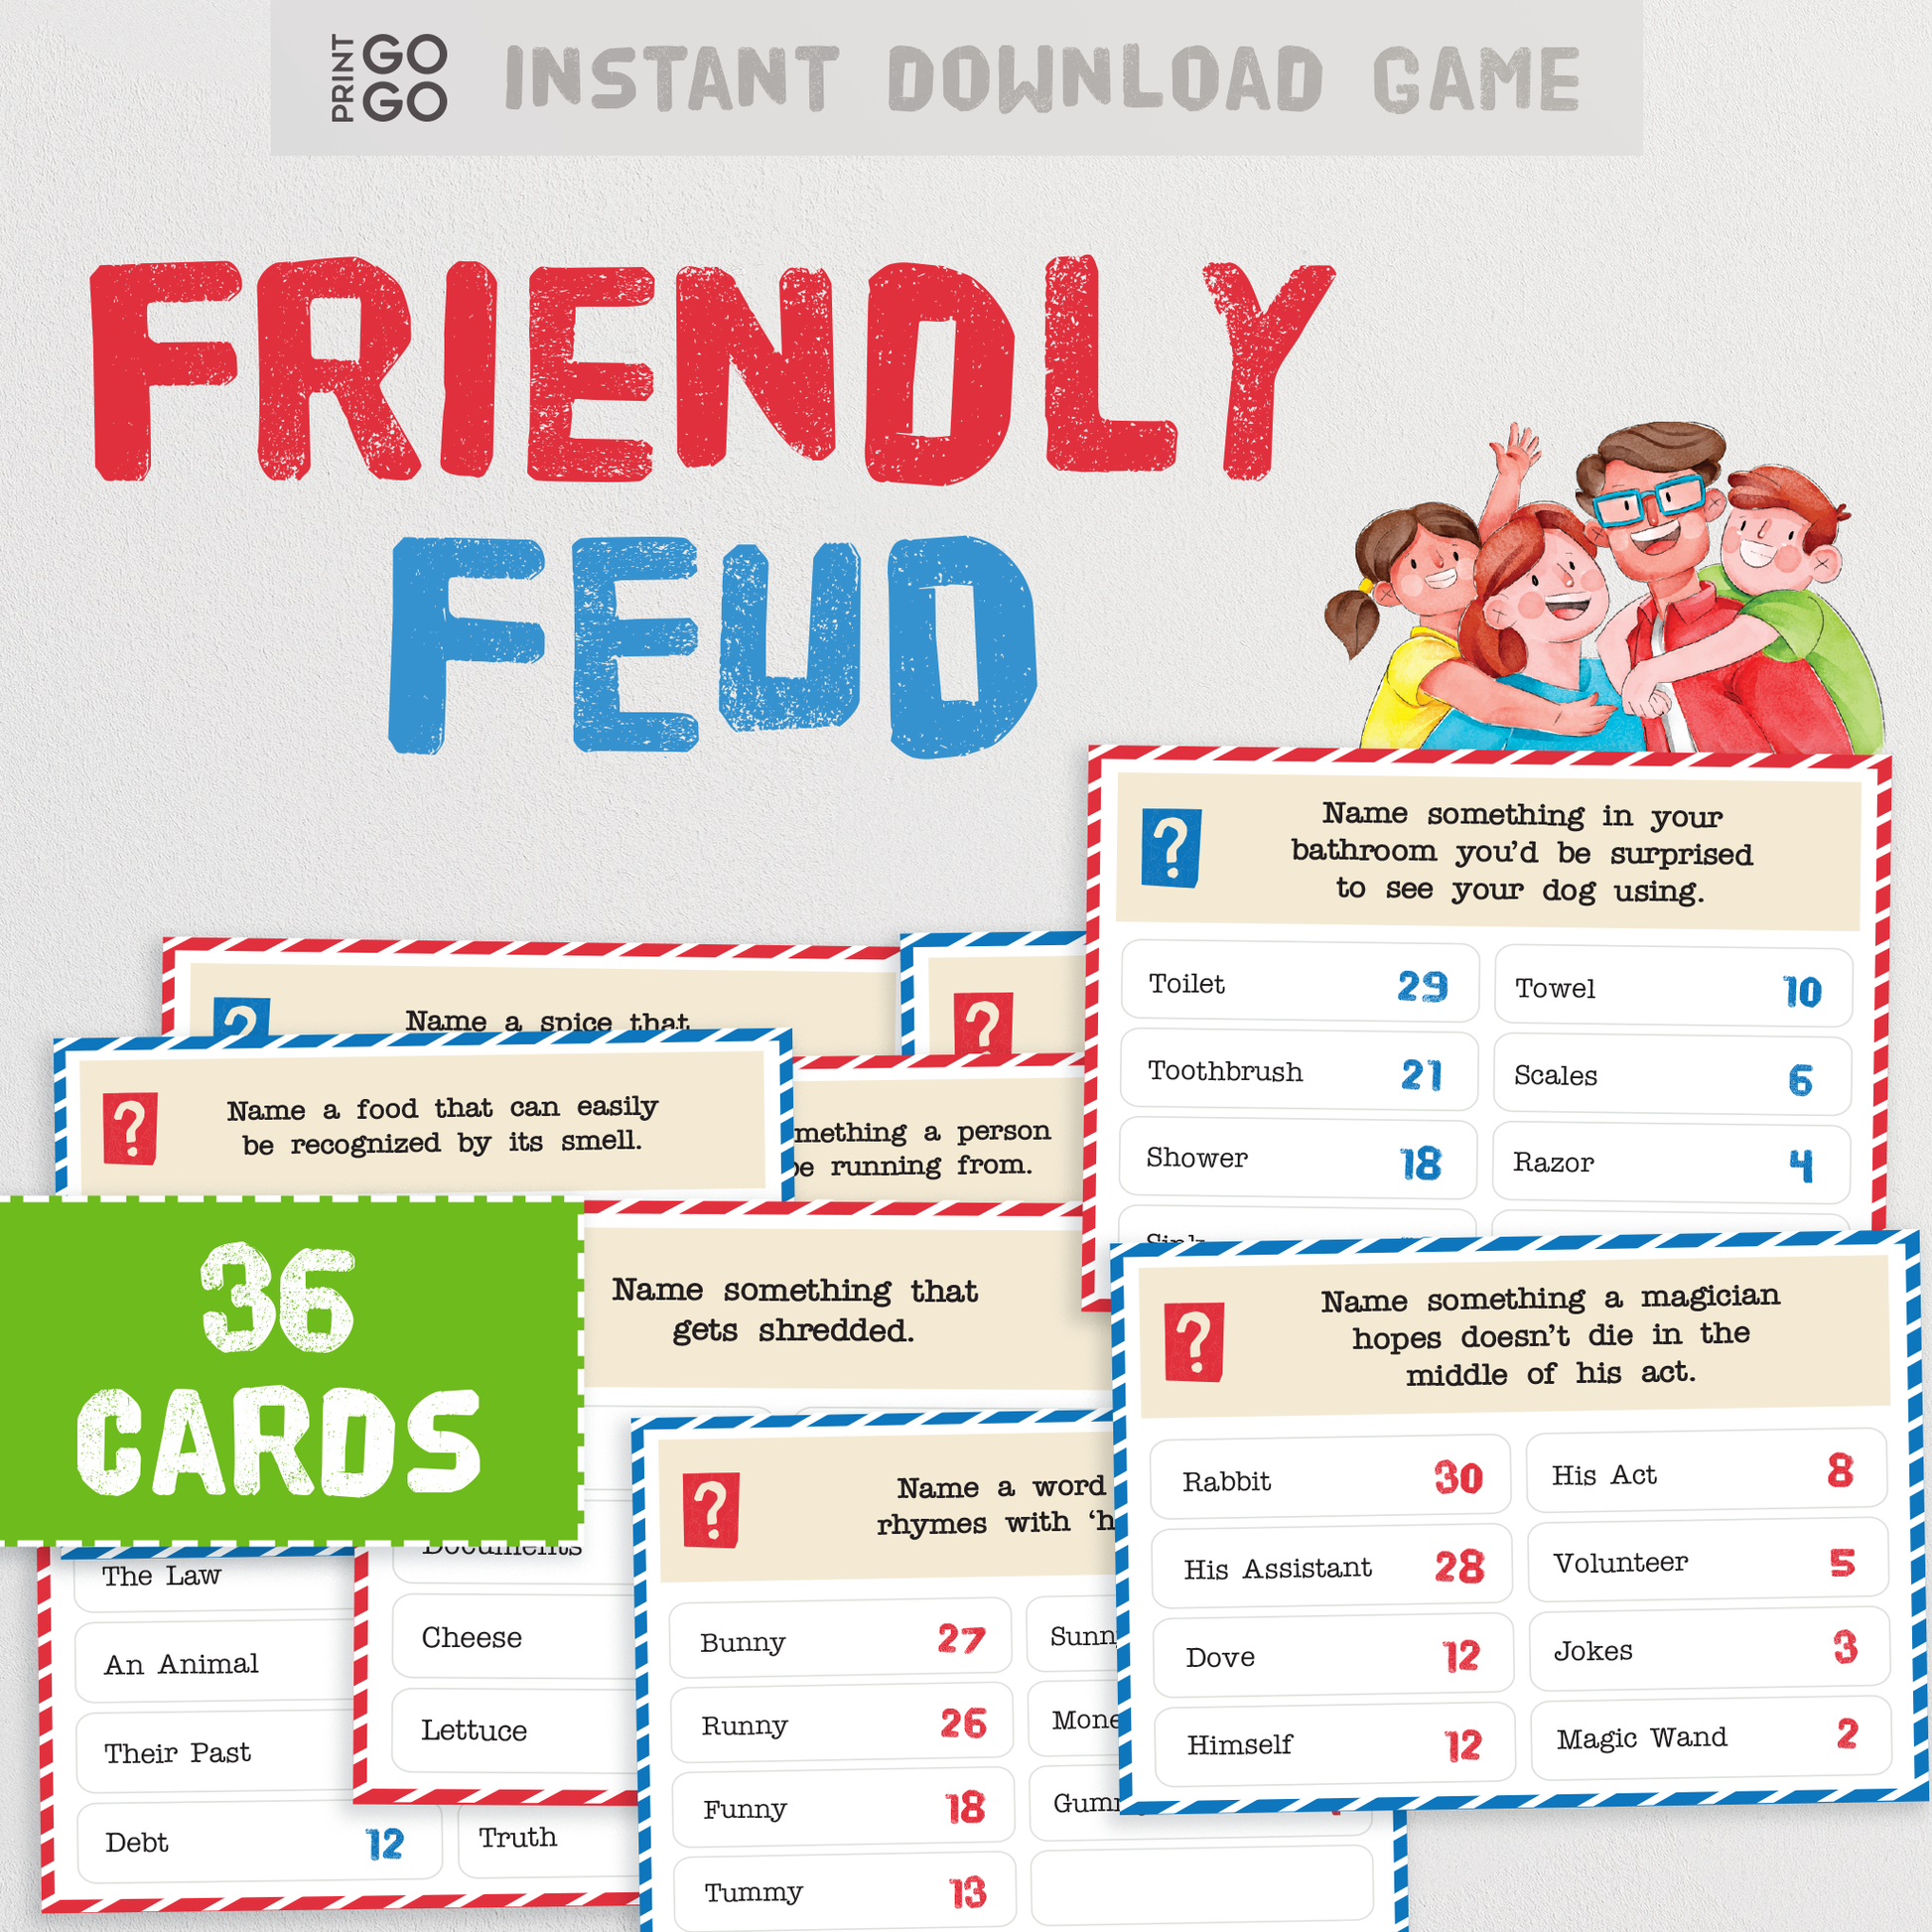 Friendly Feud - The Family Duel for Top Answers and Points